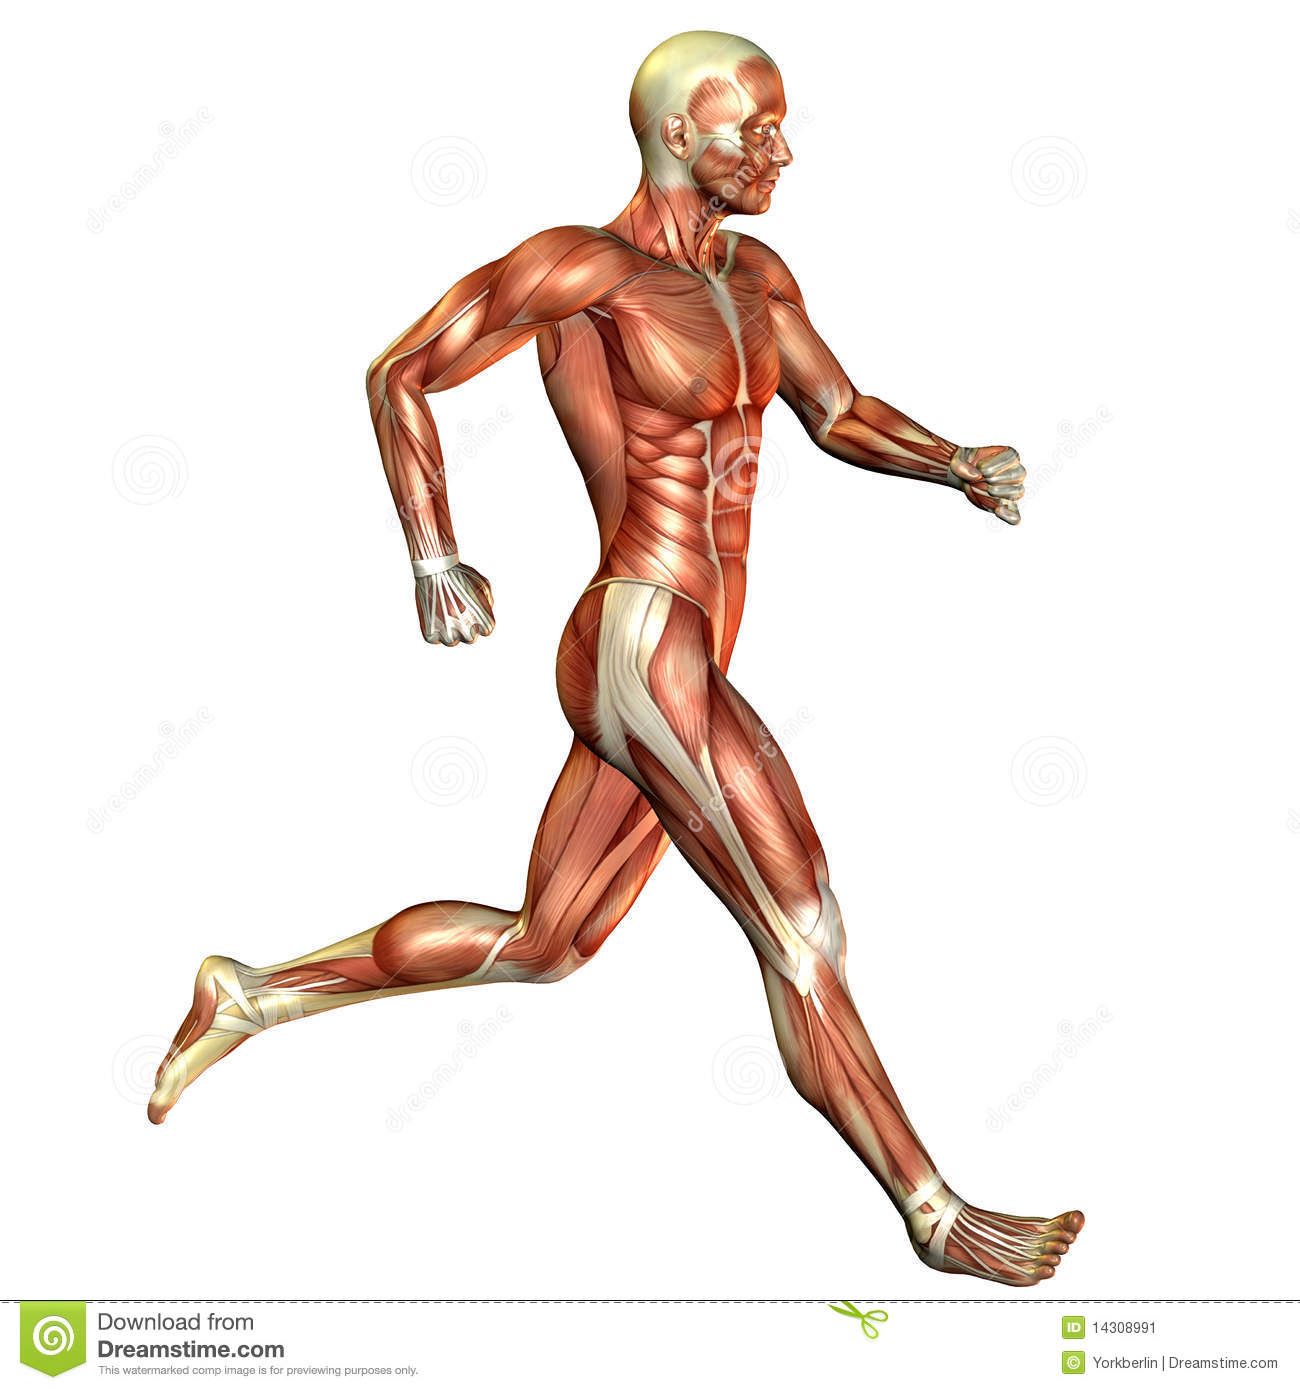 Panda free images . Muscles clipart muscle movement